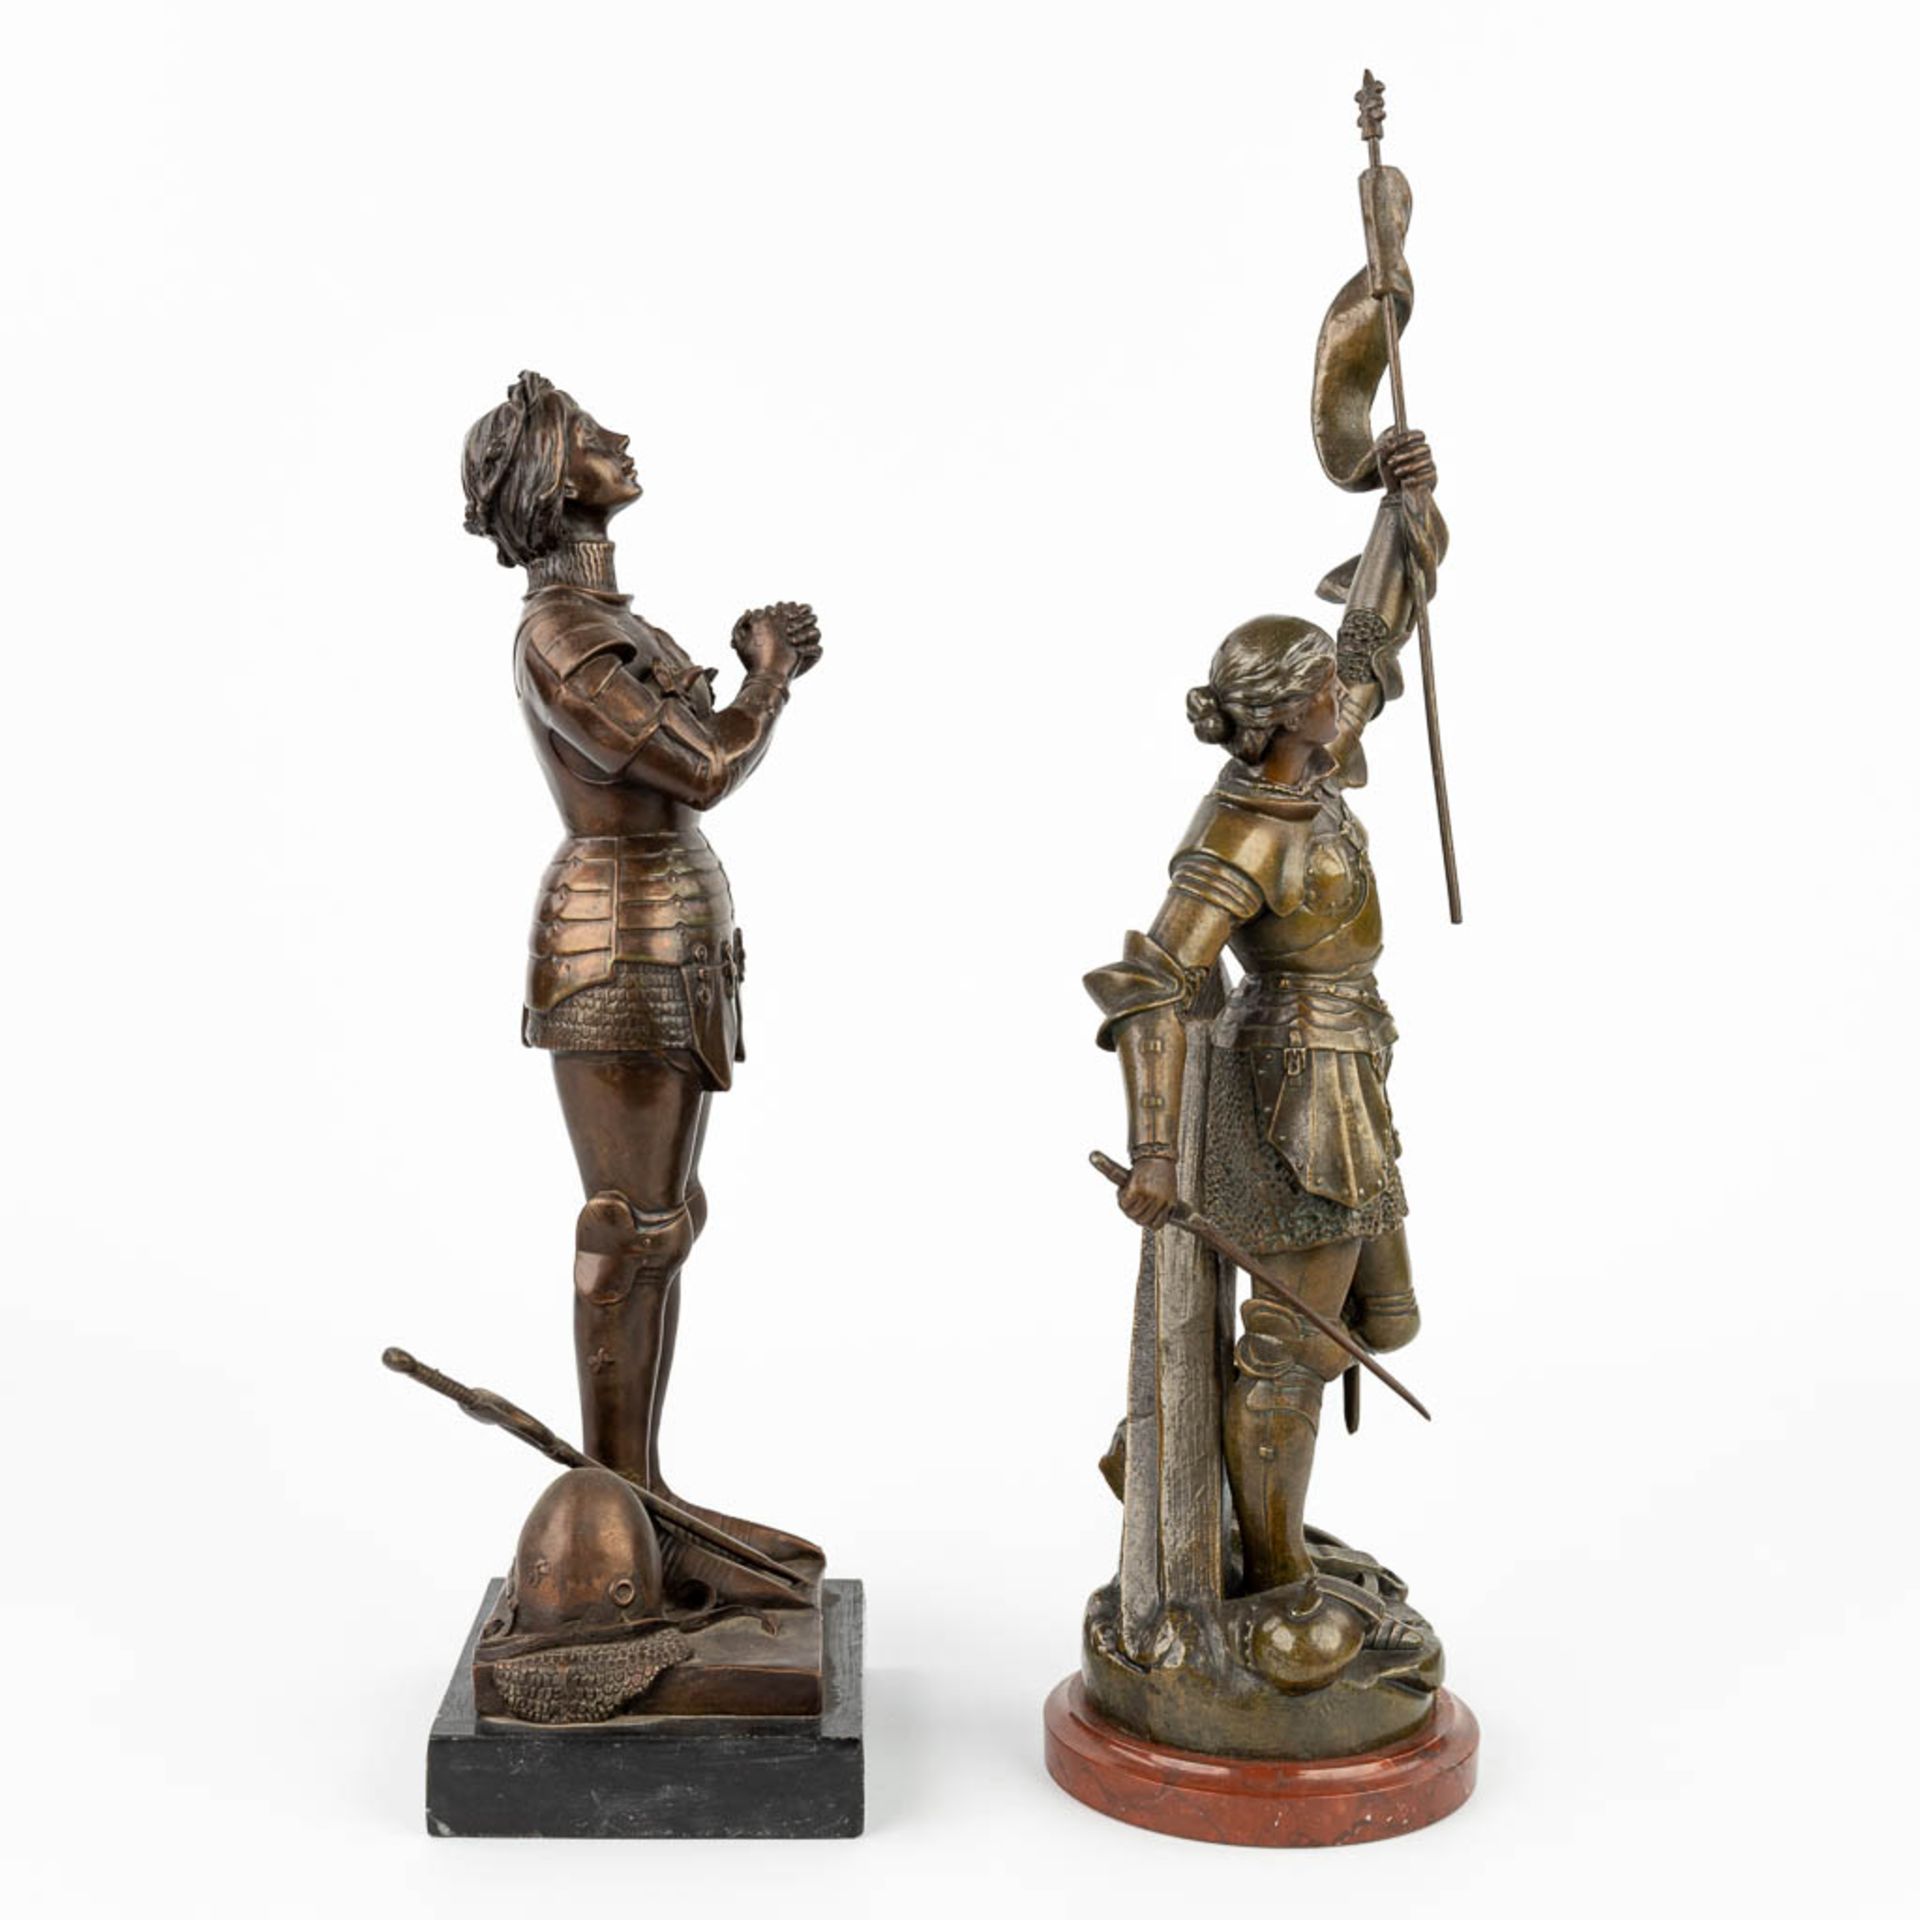 A collection of 2 statues of Jeanne D'arc made of spelter and bronze. (H:50cm) - Image 3 of 12